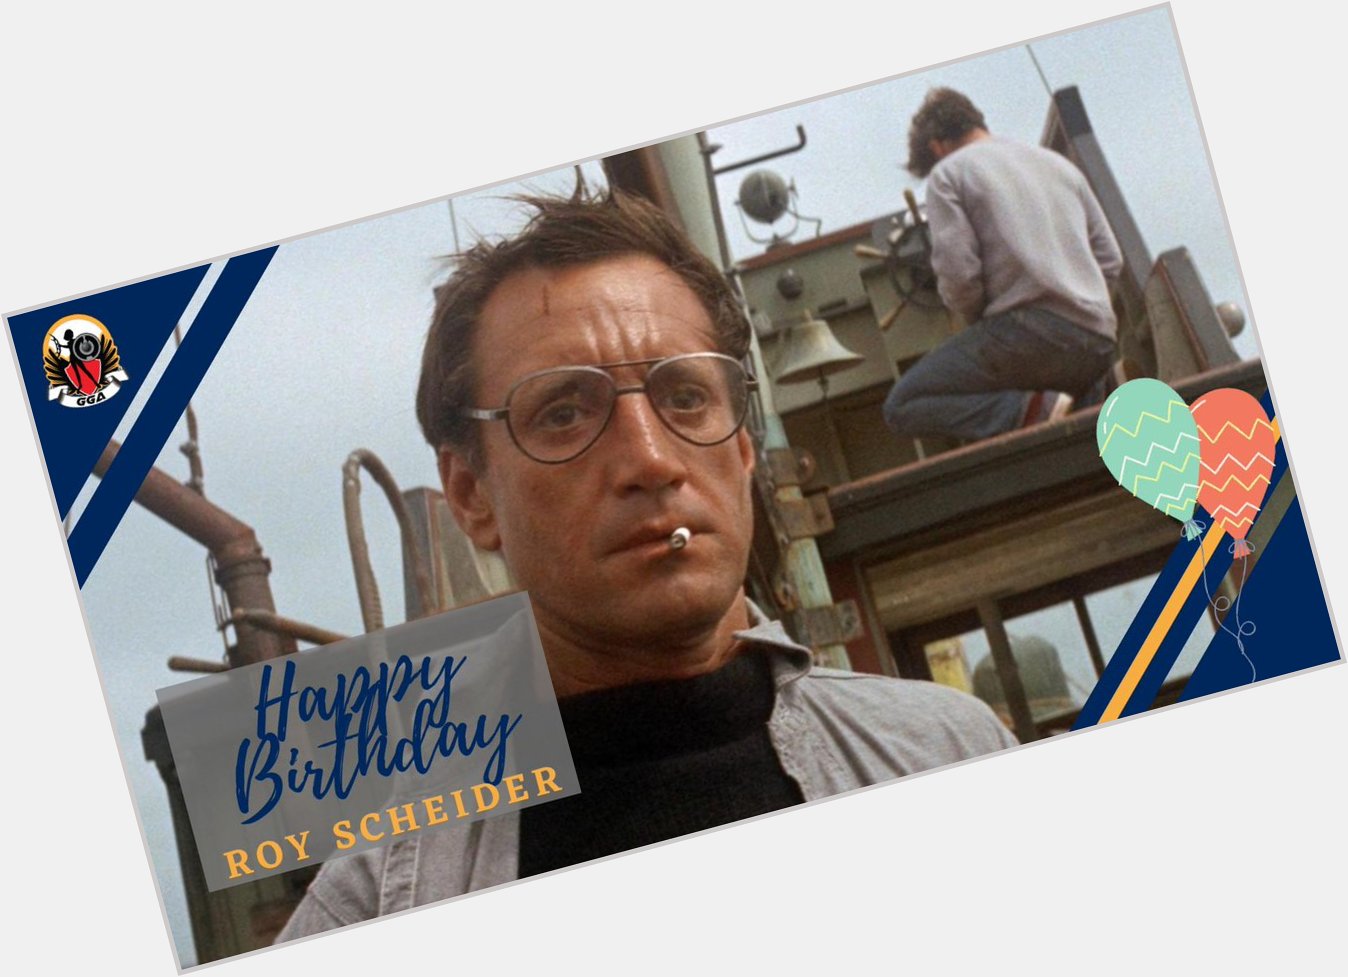 Happy Birthday to the late Roy Scheider!  What role of his is your favorite?  